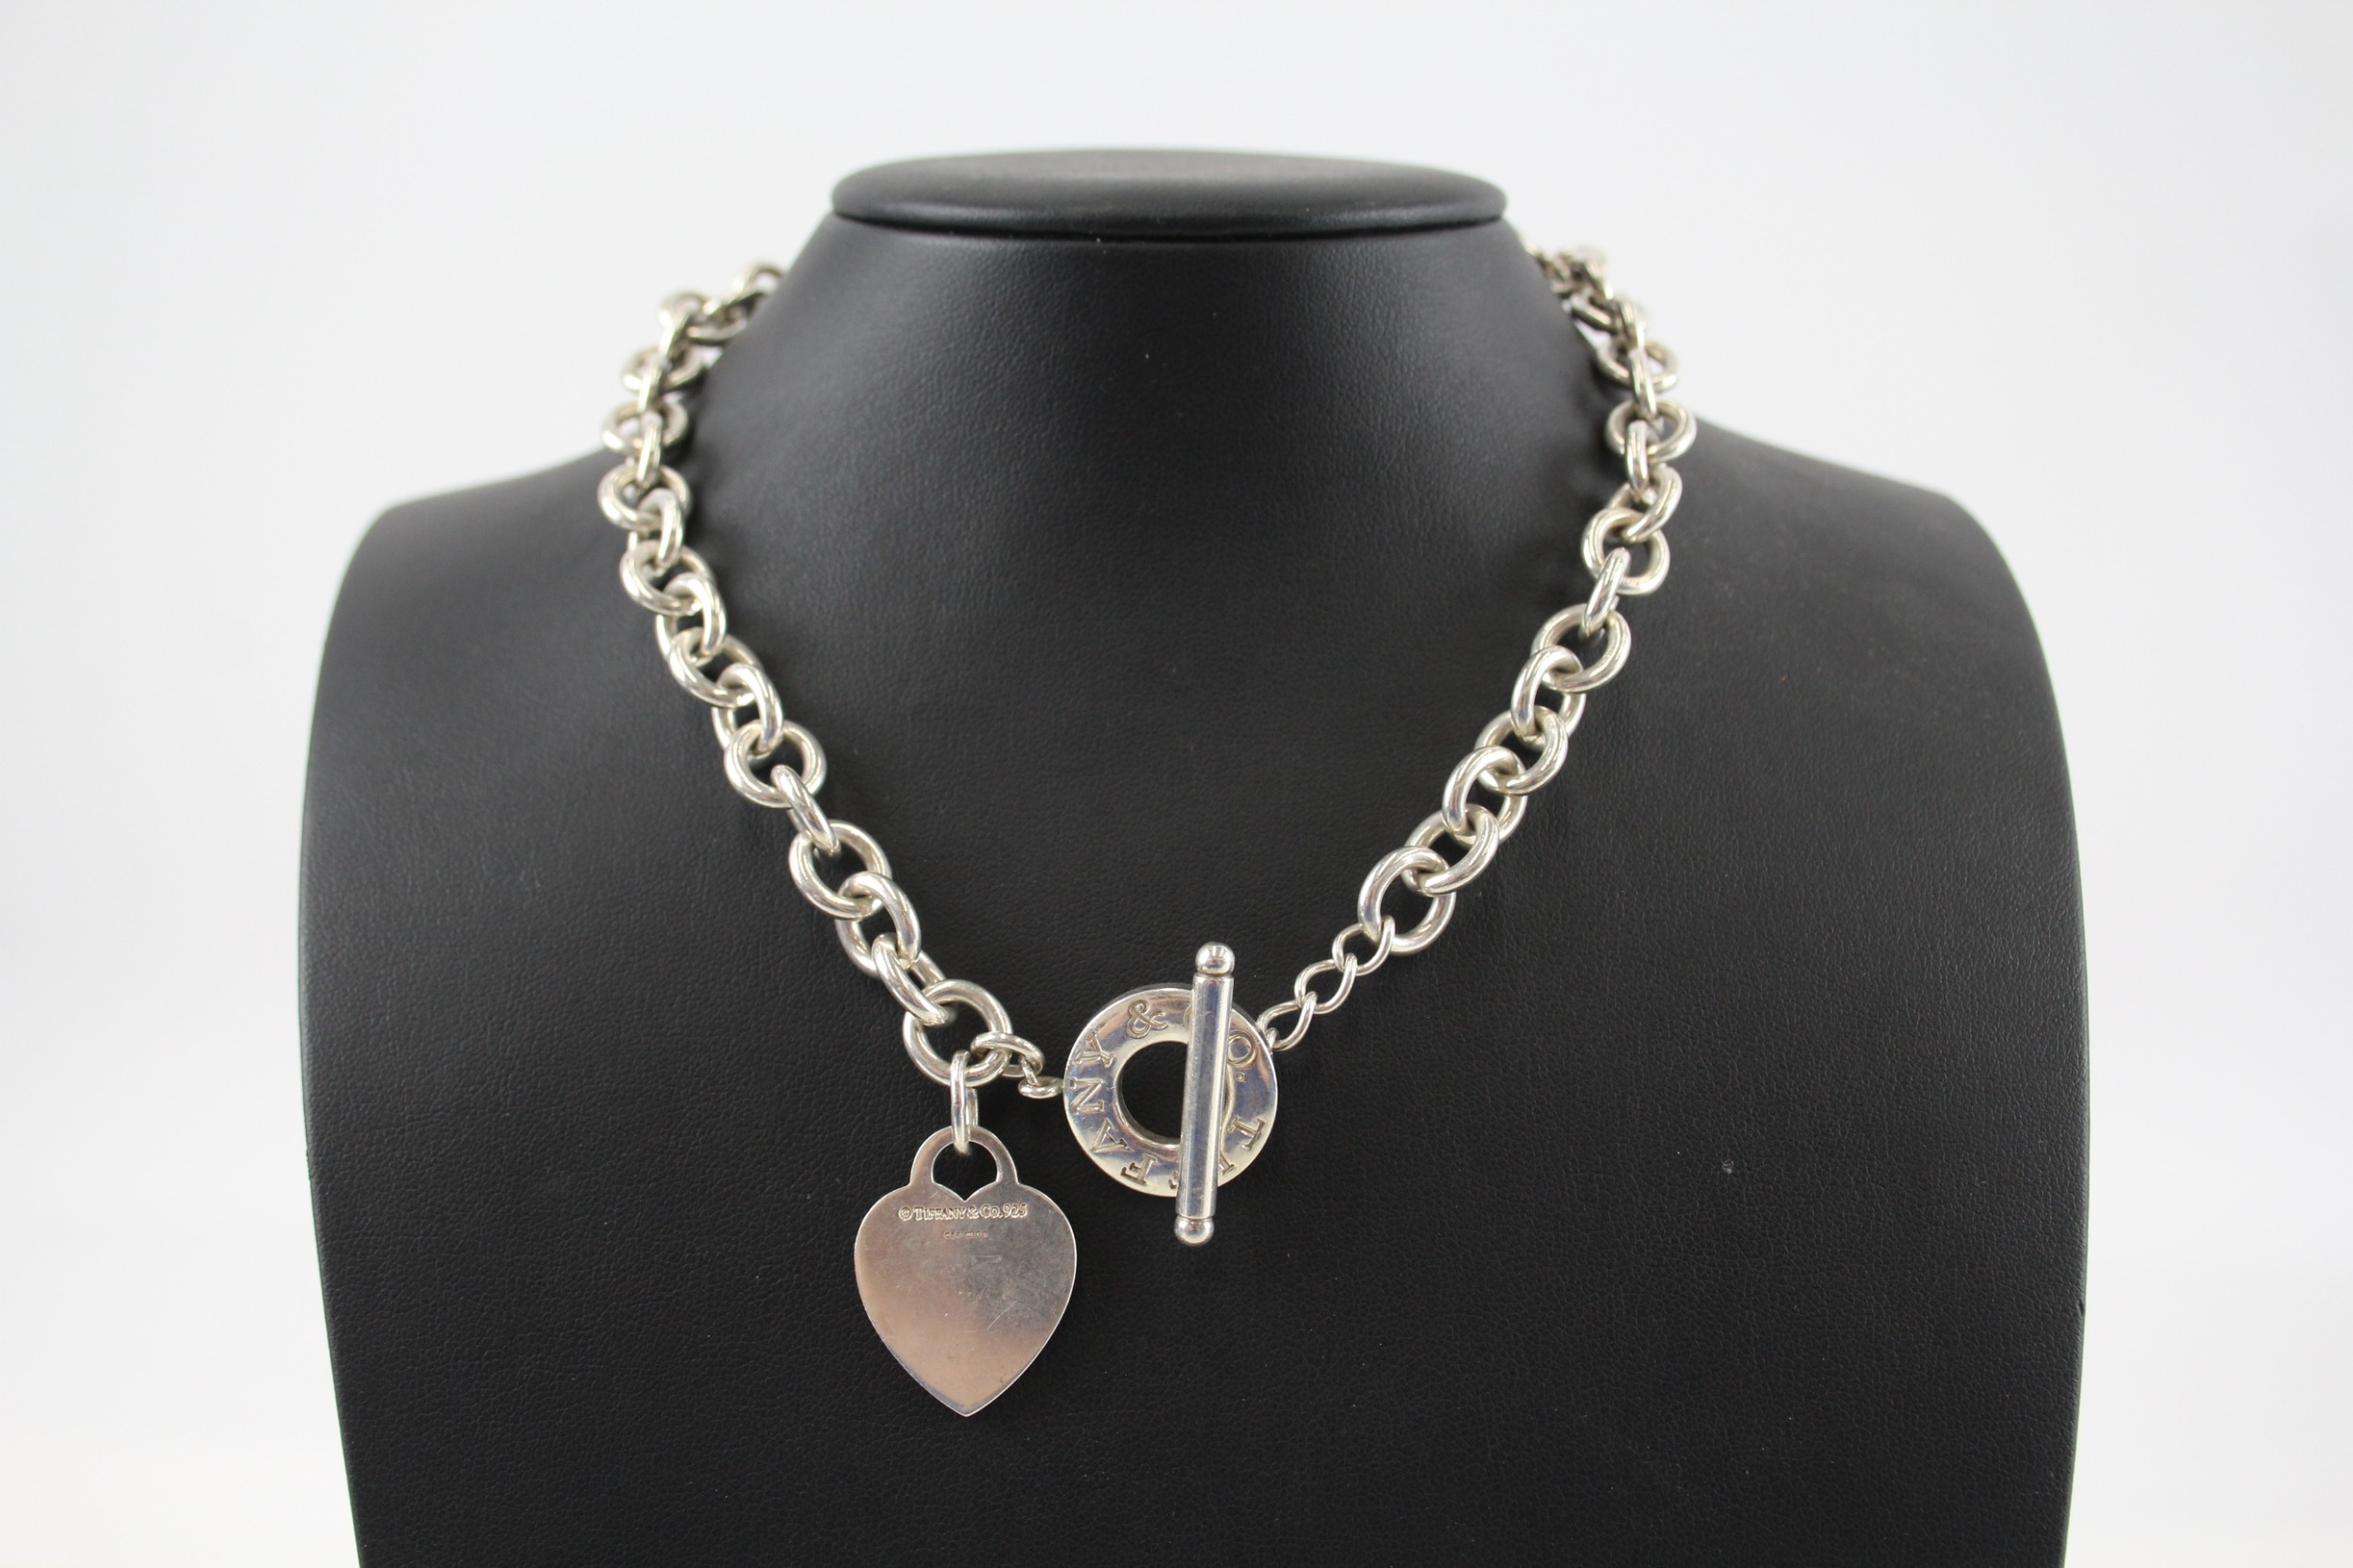 Silver belcher link necklace with heart tag by designer Tiffany & Co (76g)